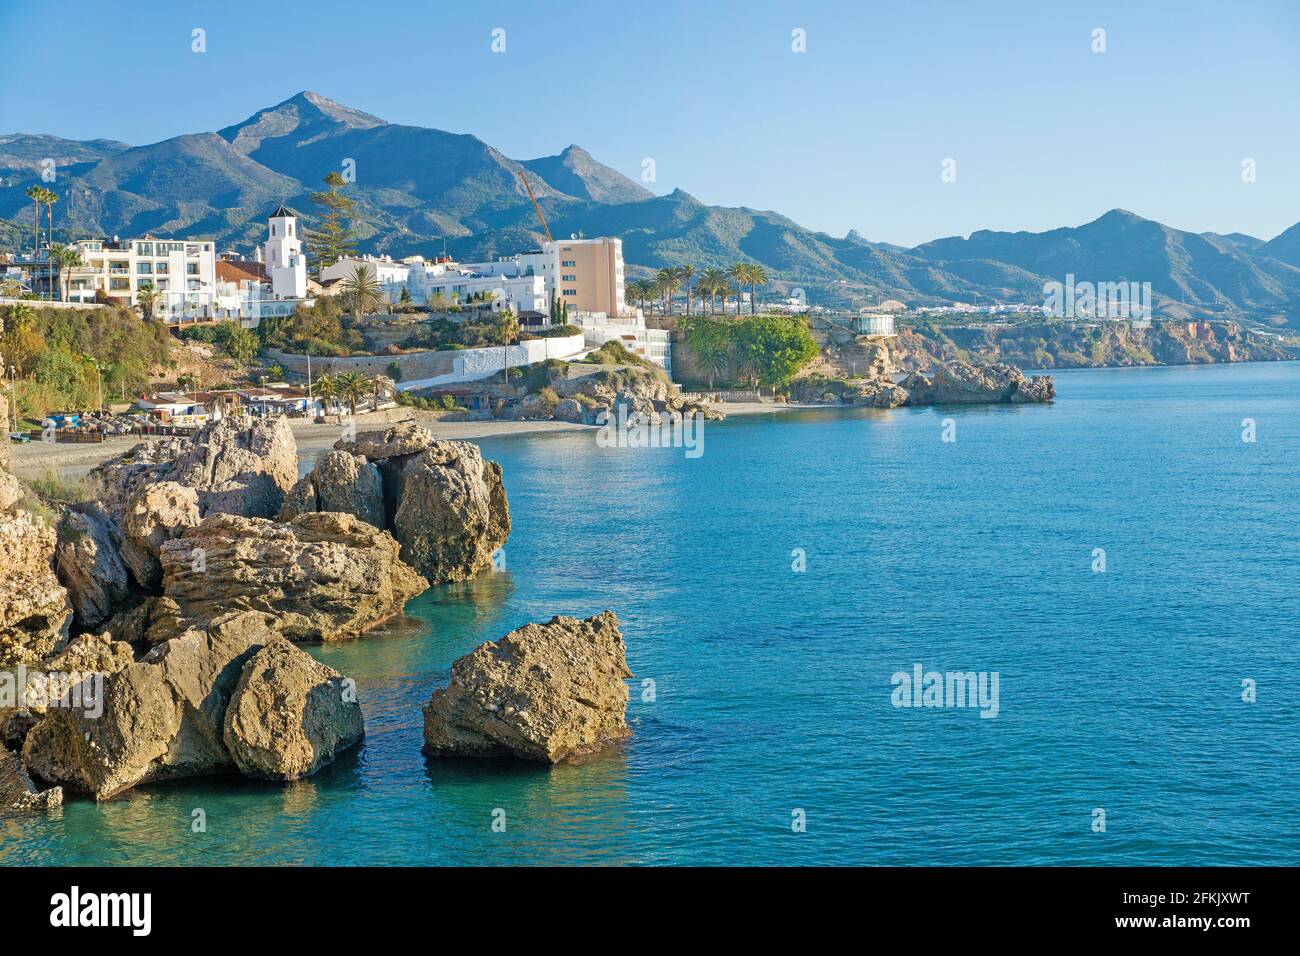 Panoramic view of Nerja, with Balcony of Europe, viewing platform and landmark of the coast town, Andalucia, Costa del Sol, Spain Stock Photo